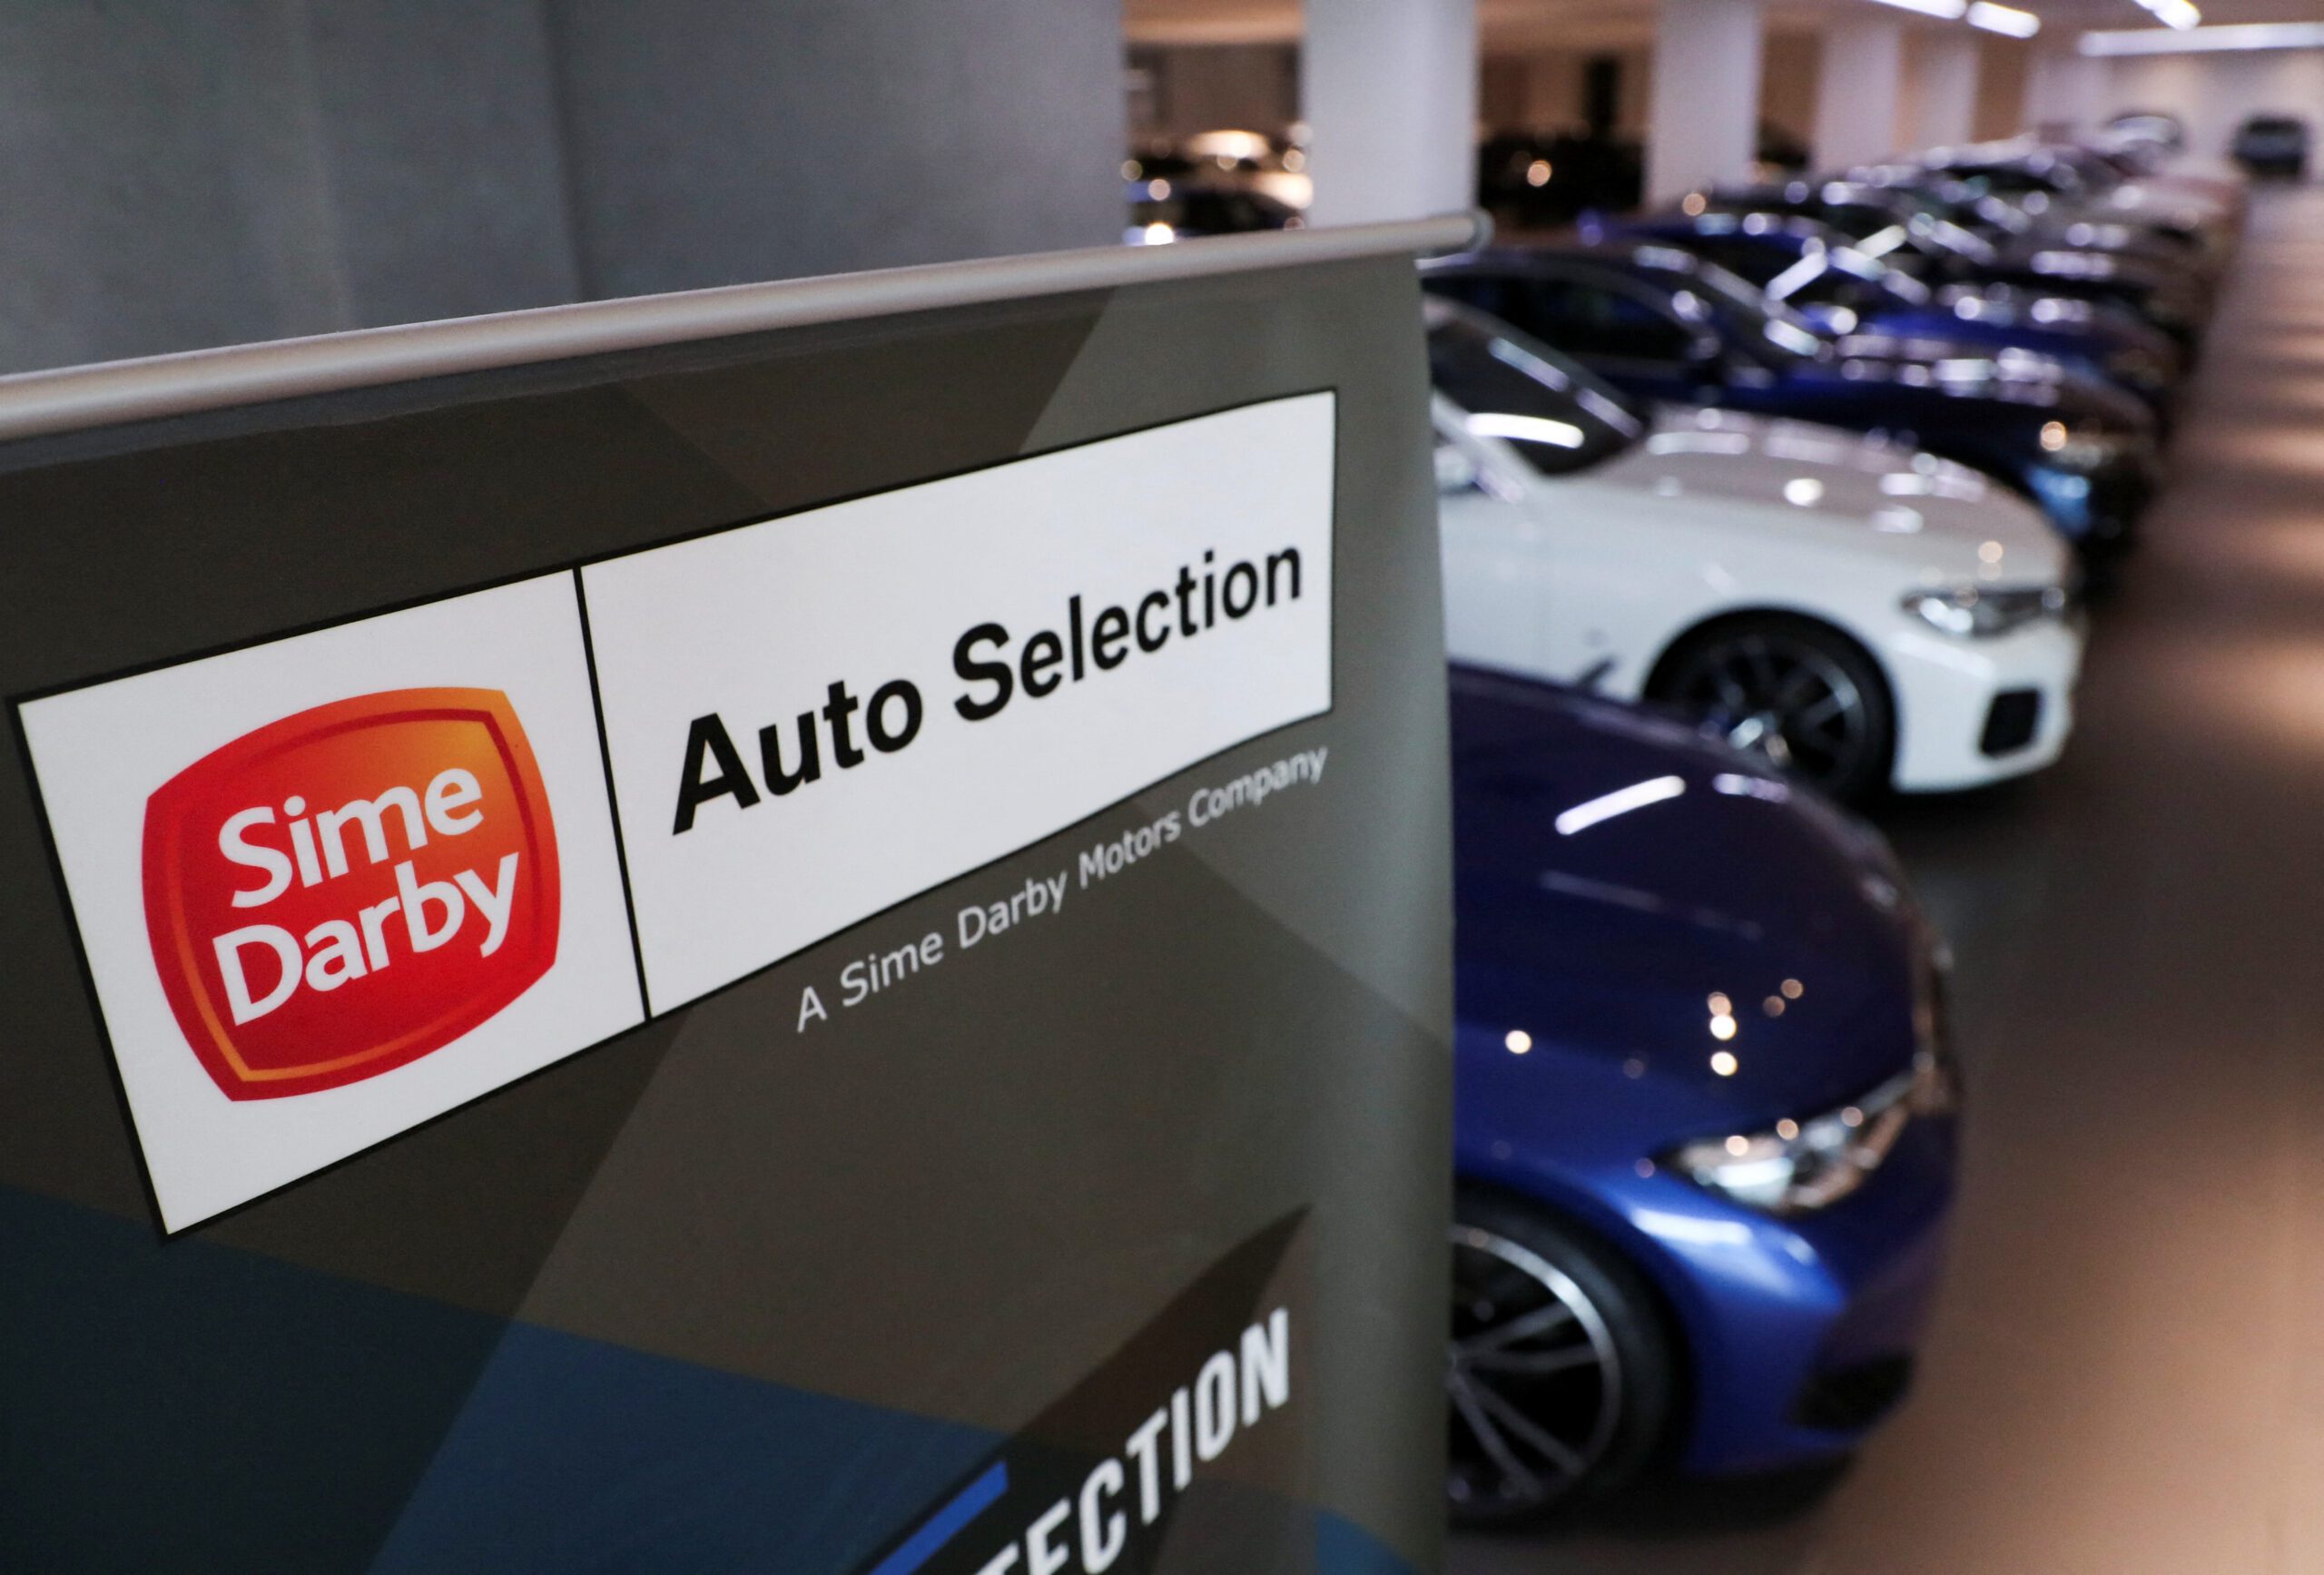 Malaysia's Sime Darby seeks to expand car retail business to India, Indonesia